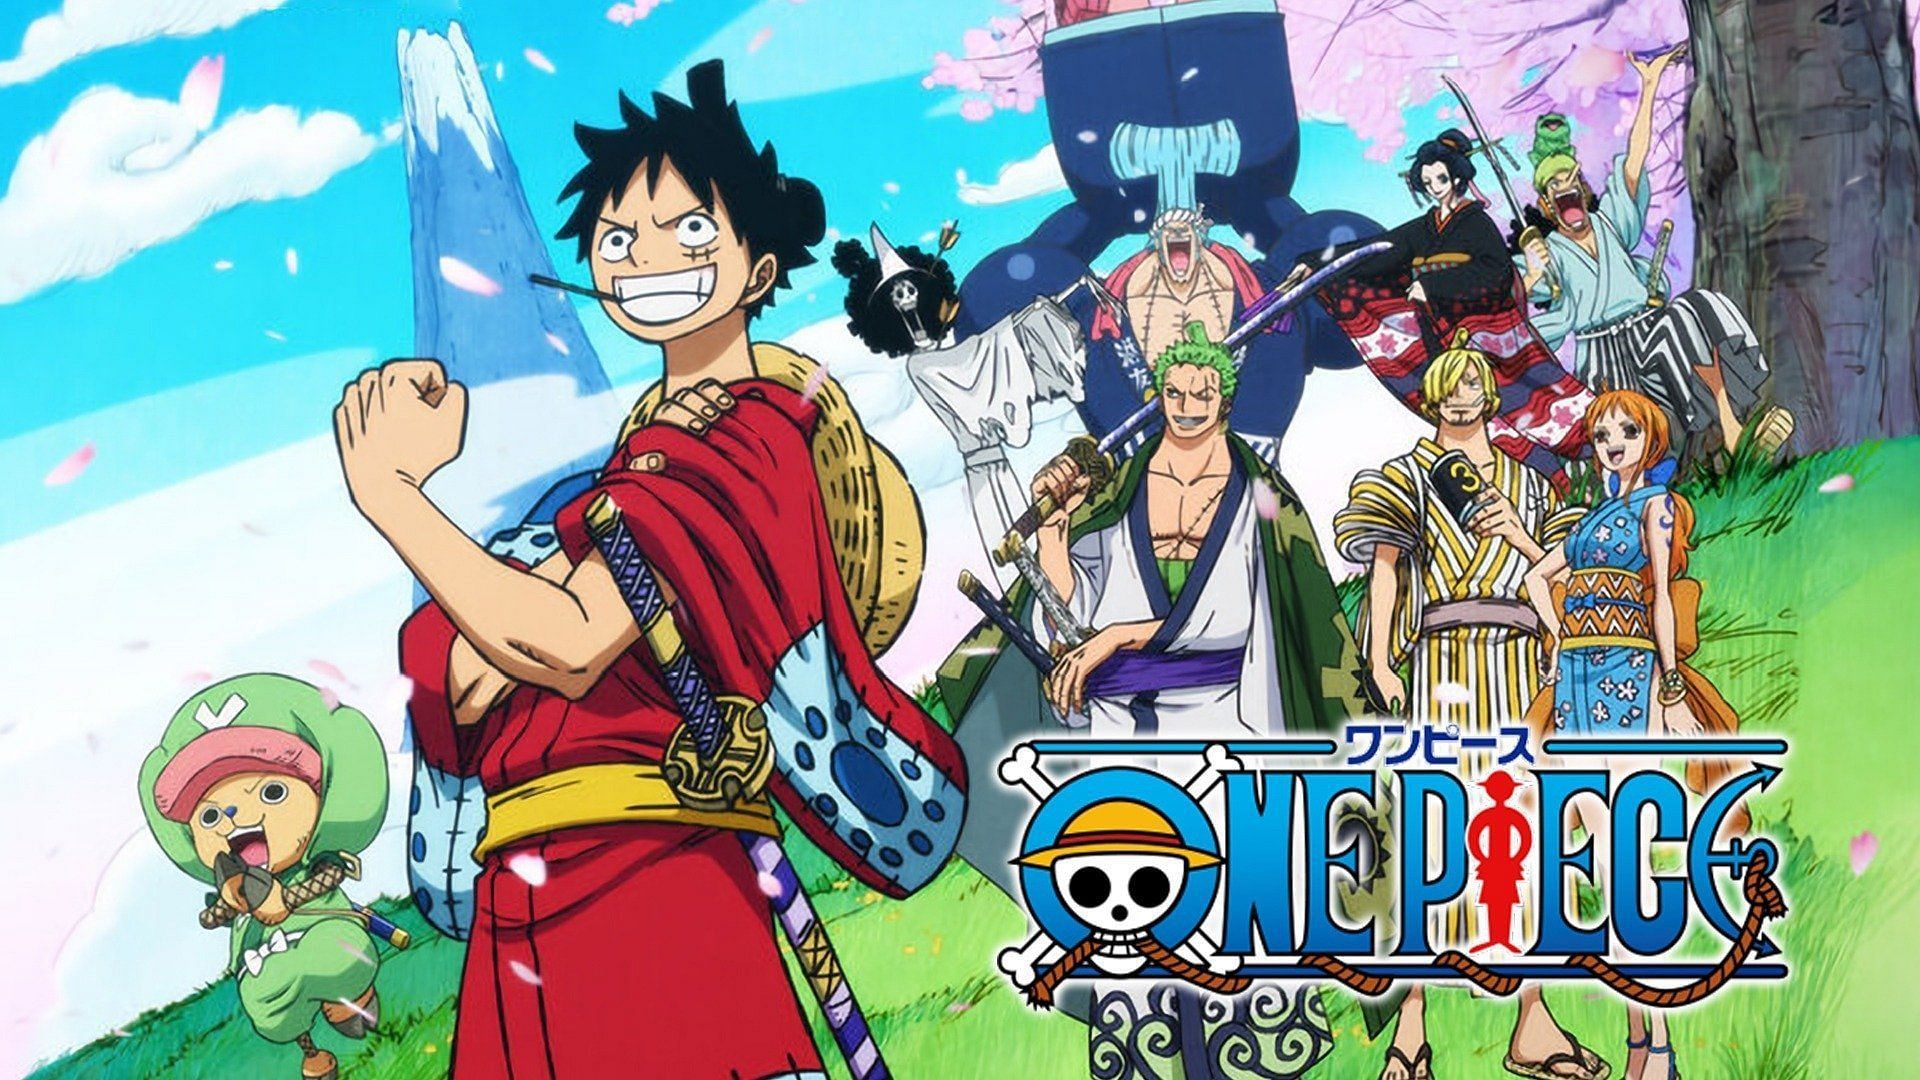 One of the Wano arc